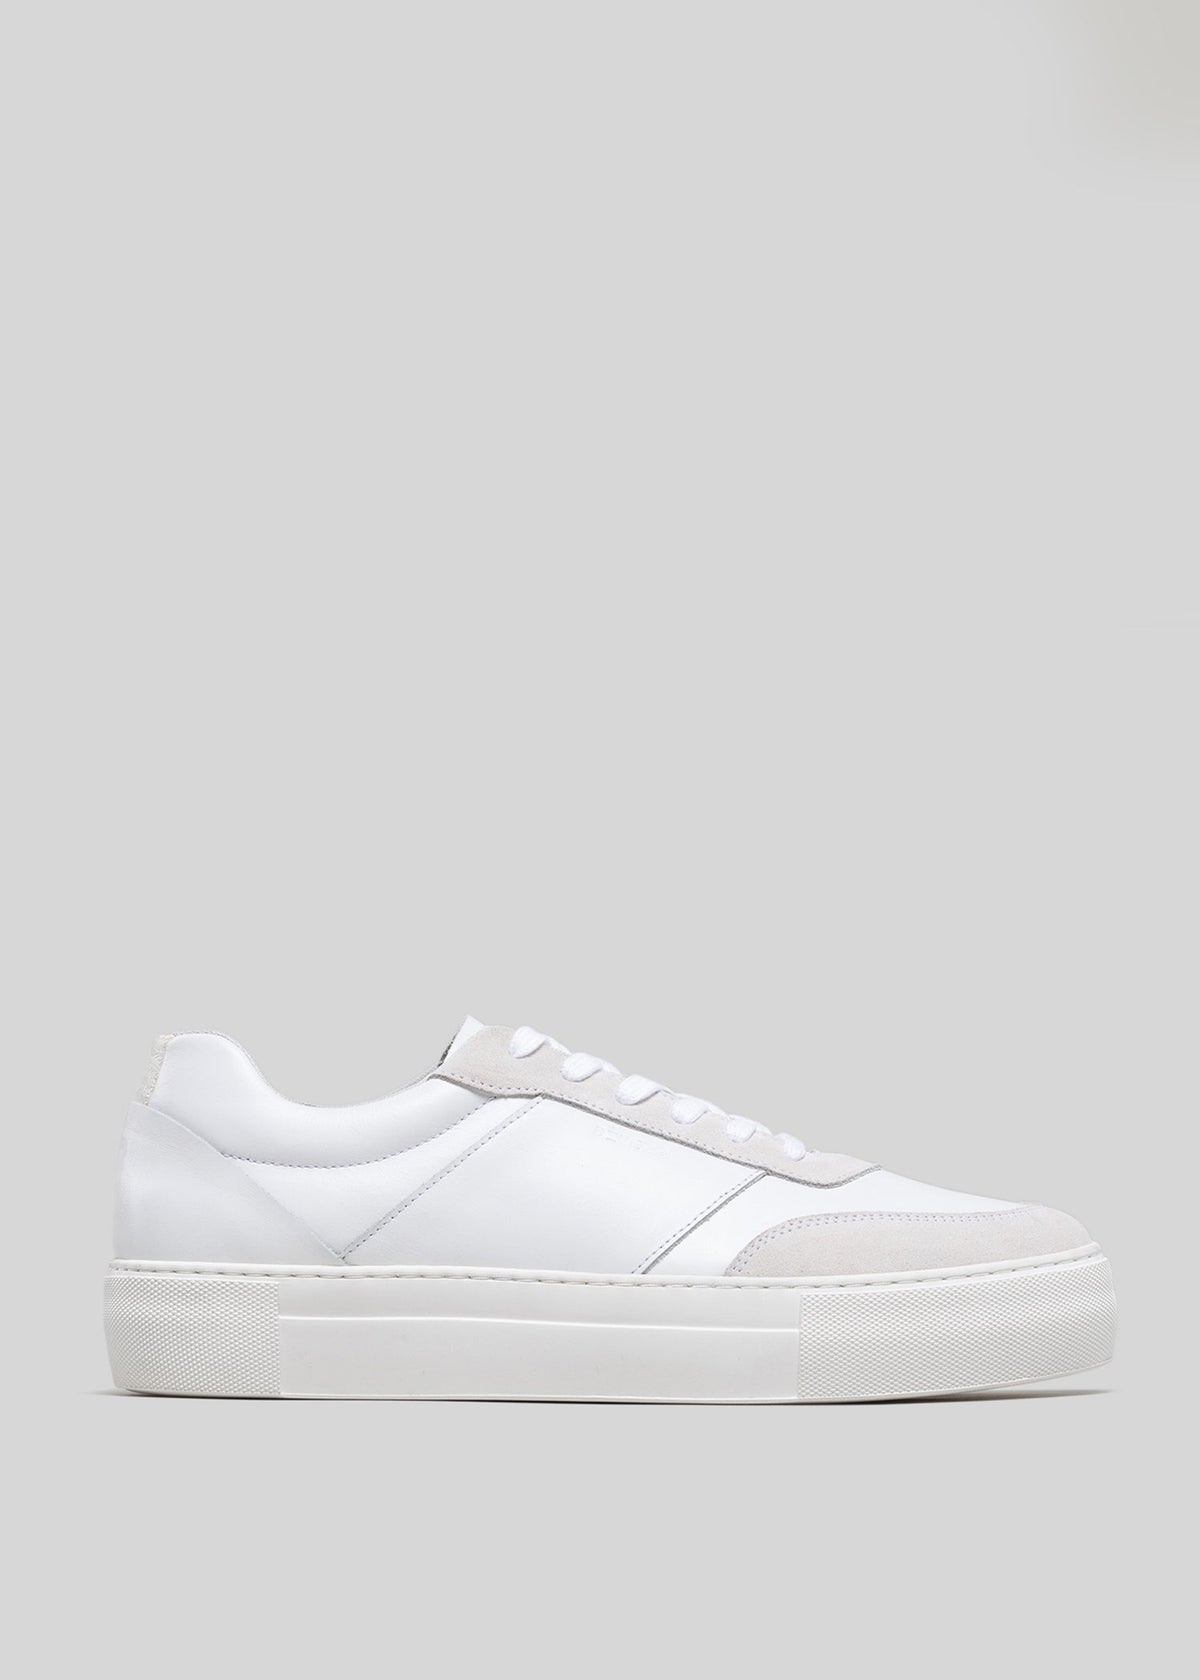 A side view of a Now White Canvas low top sneaker with a thick sole, displayed against a light grey background.